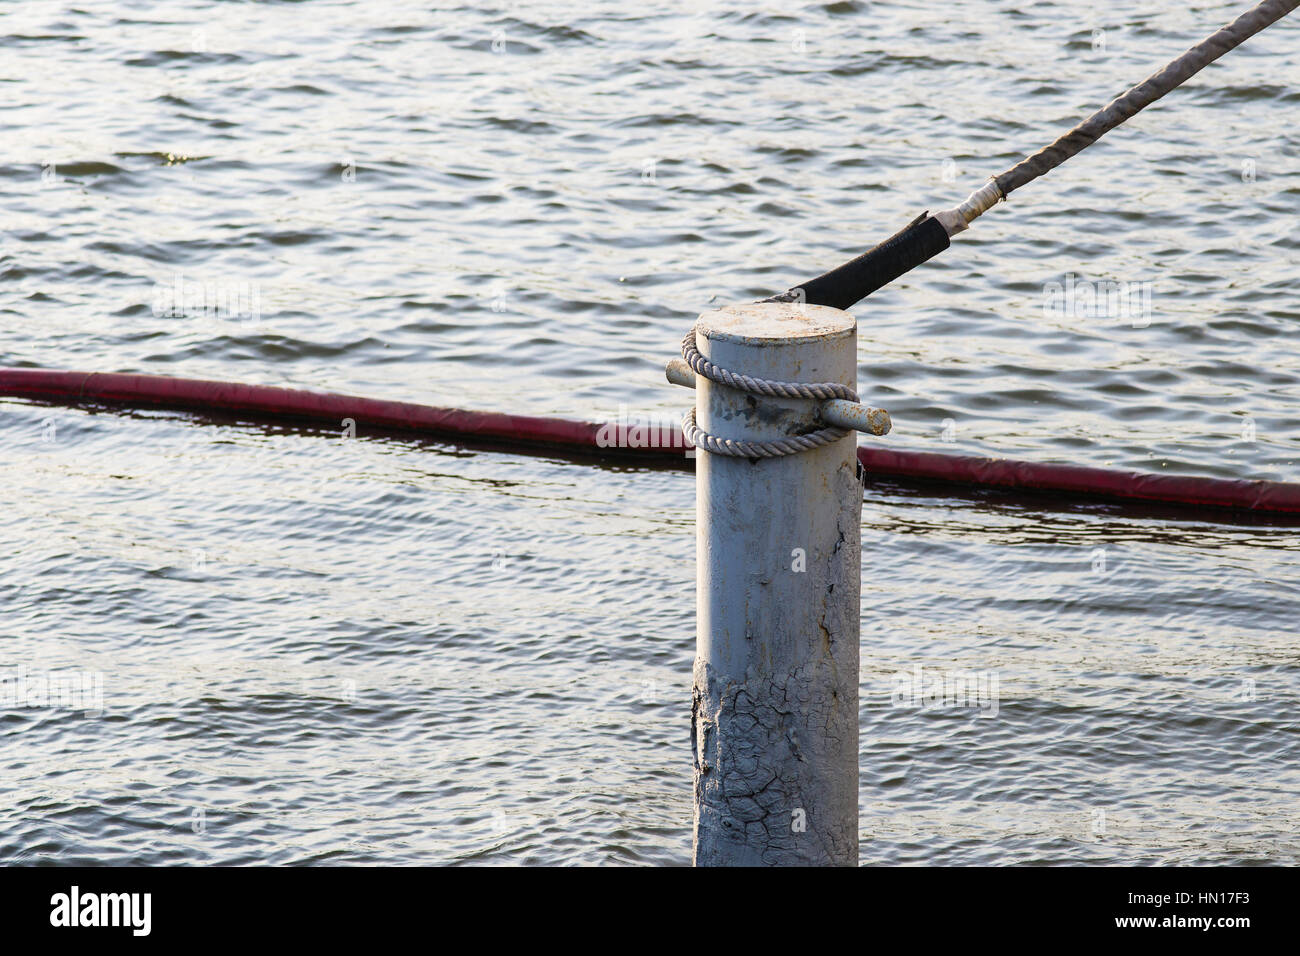 Water of the river, metal pole or riding bitts, anchor tow tied to the pole. Red cable lies in the water. Minimalistic industrial composition. Stock Photo